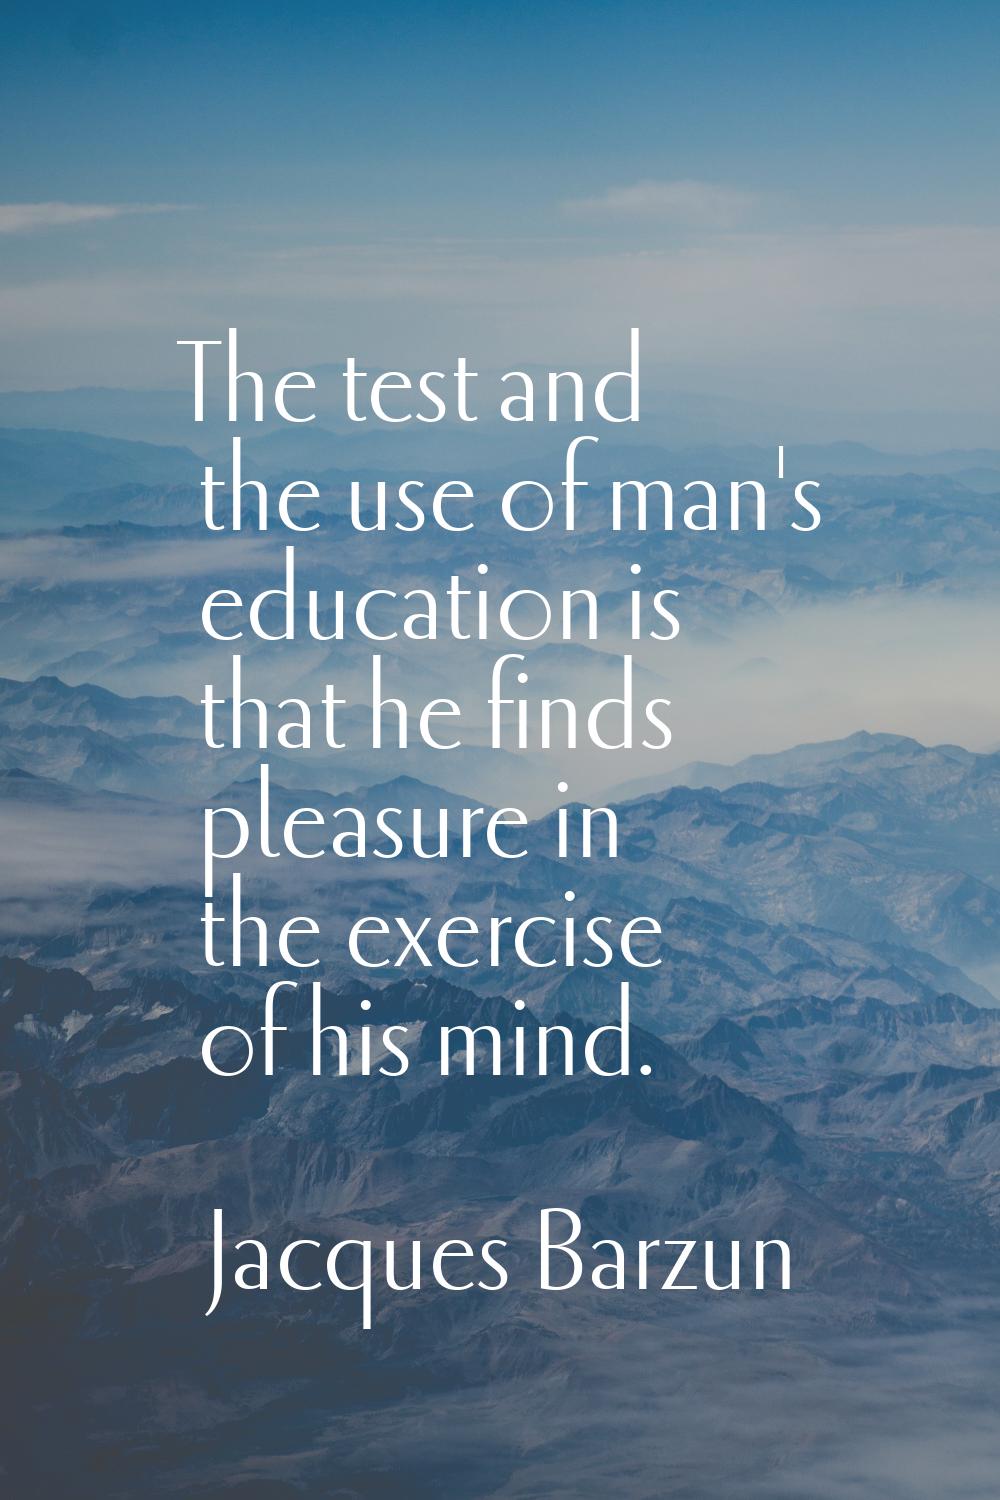 The test and the use of man's education is that he finds pleasure in the exercise of his mind.